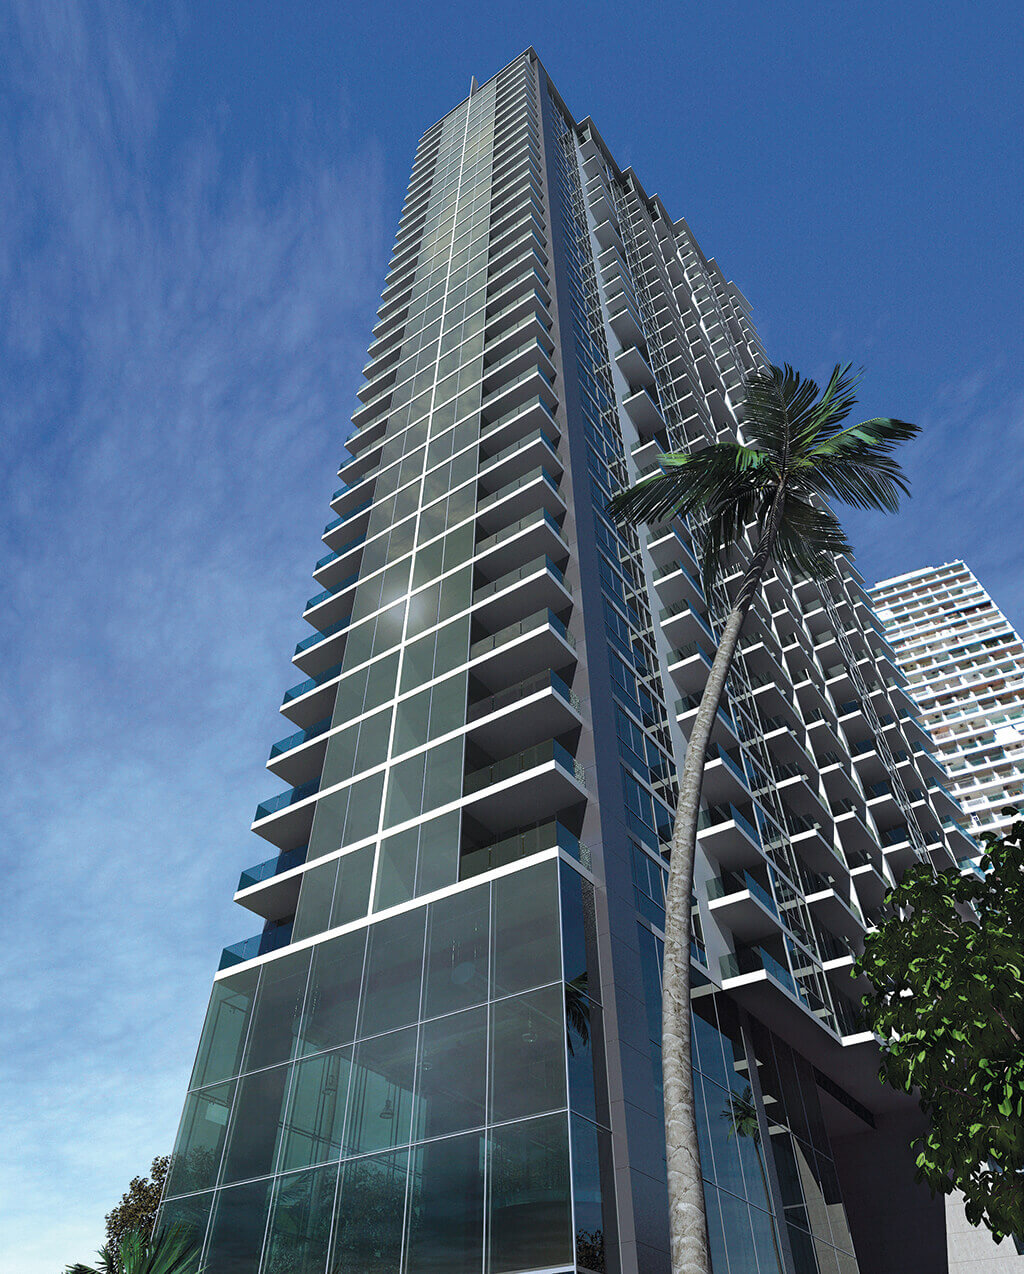 Rendered image of the Wong Amat Tower by Mario Kleff